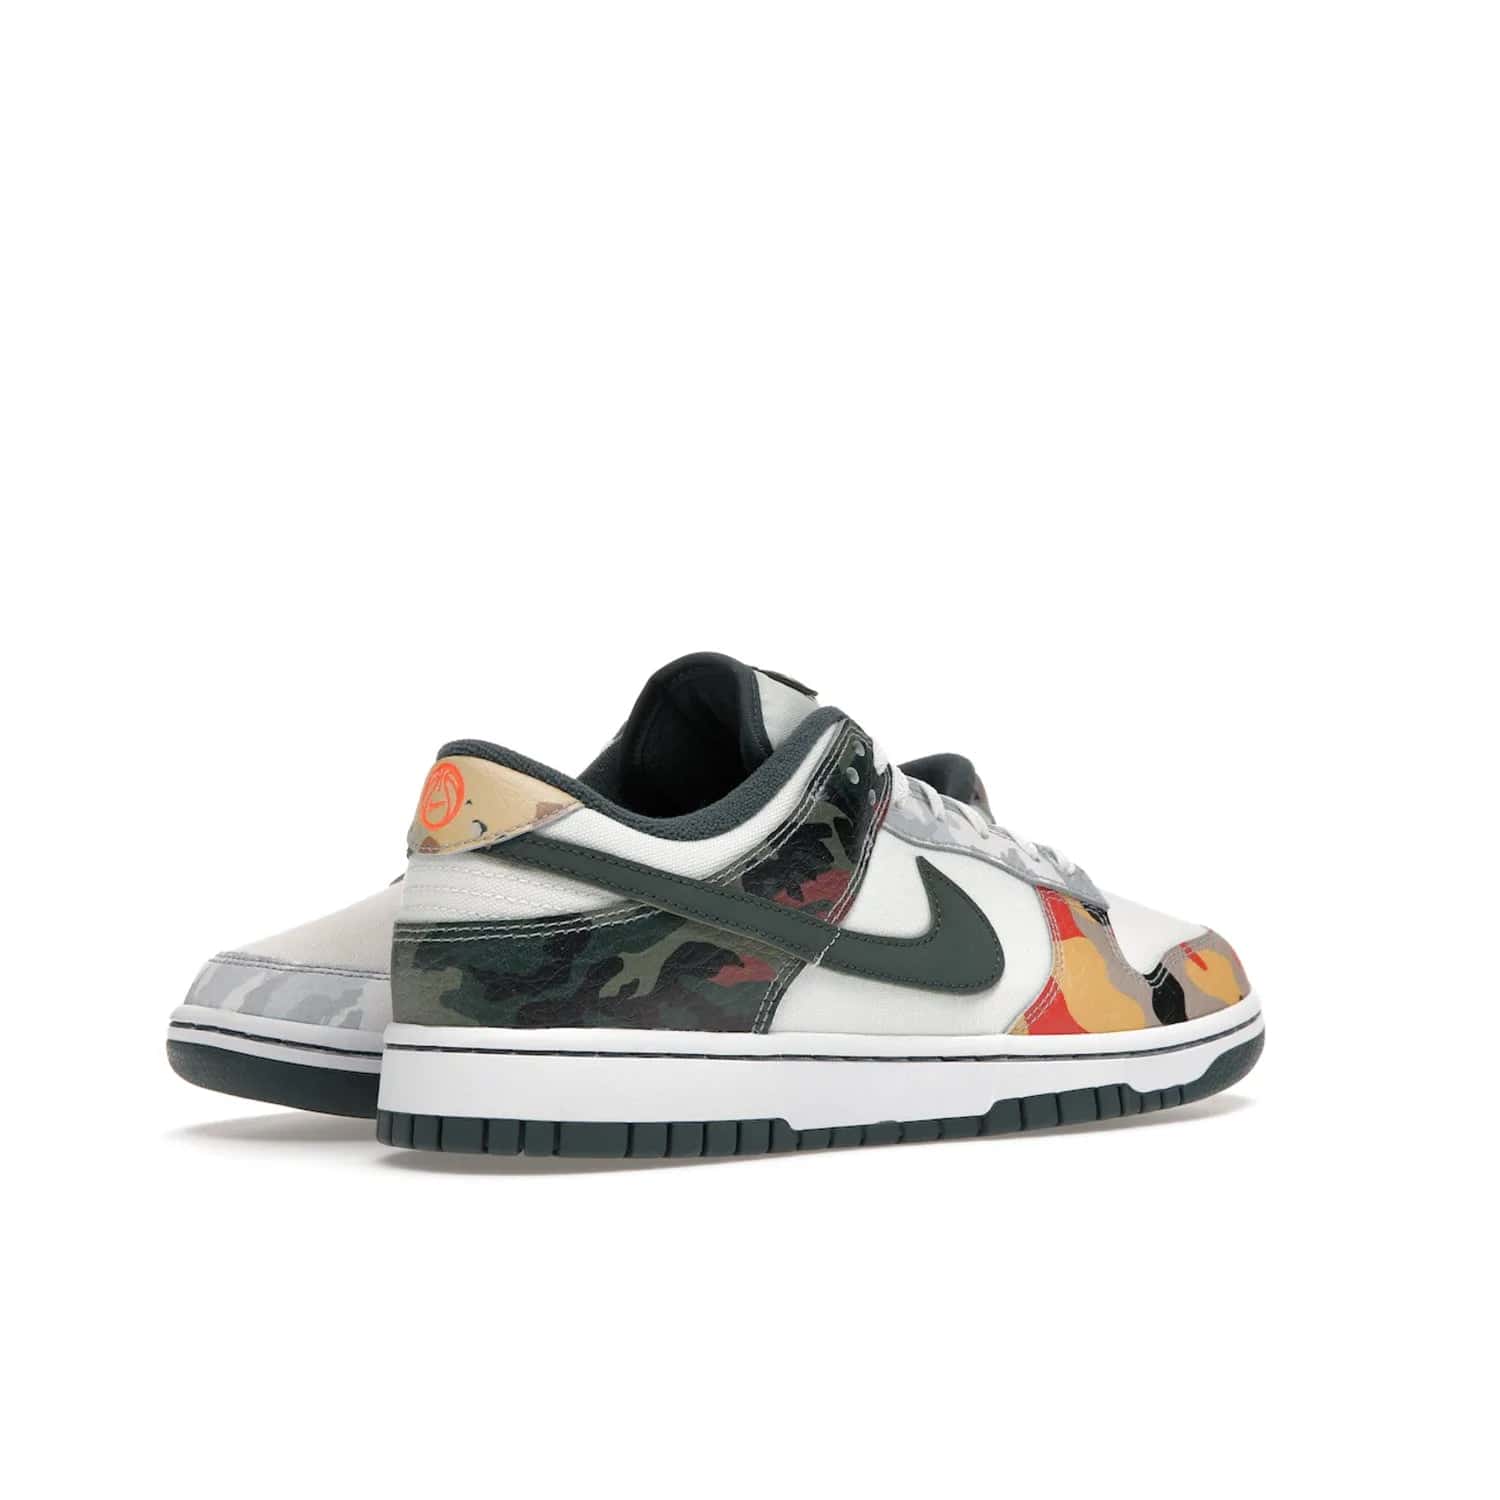 Nike Dunk Low SE Sail Multi-Camo - Image 33 - Only at www.BallersClubKickz.com - Classic design meets statement style in the Nike Dunk Low SE Sail Multi-Camo. White leather base with multi-color camo overlays, vibrant Nike Swooshes, and orange Nike embroidery. Get yours August 2021.